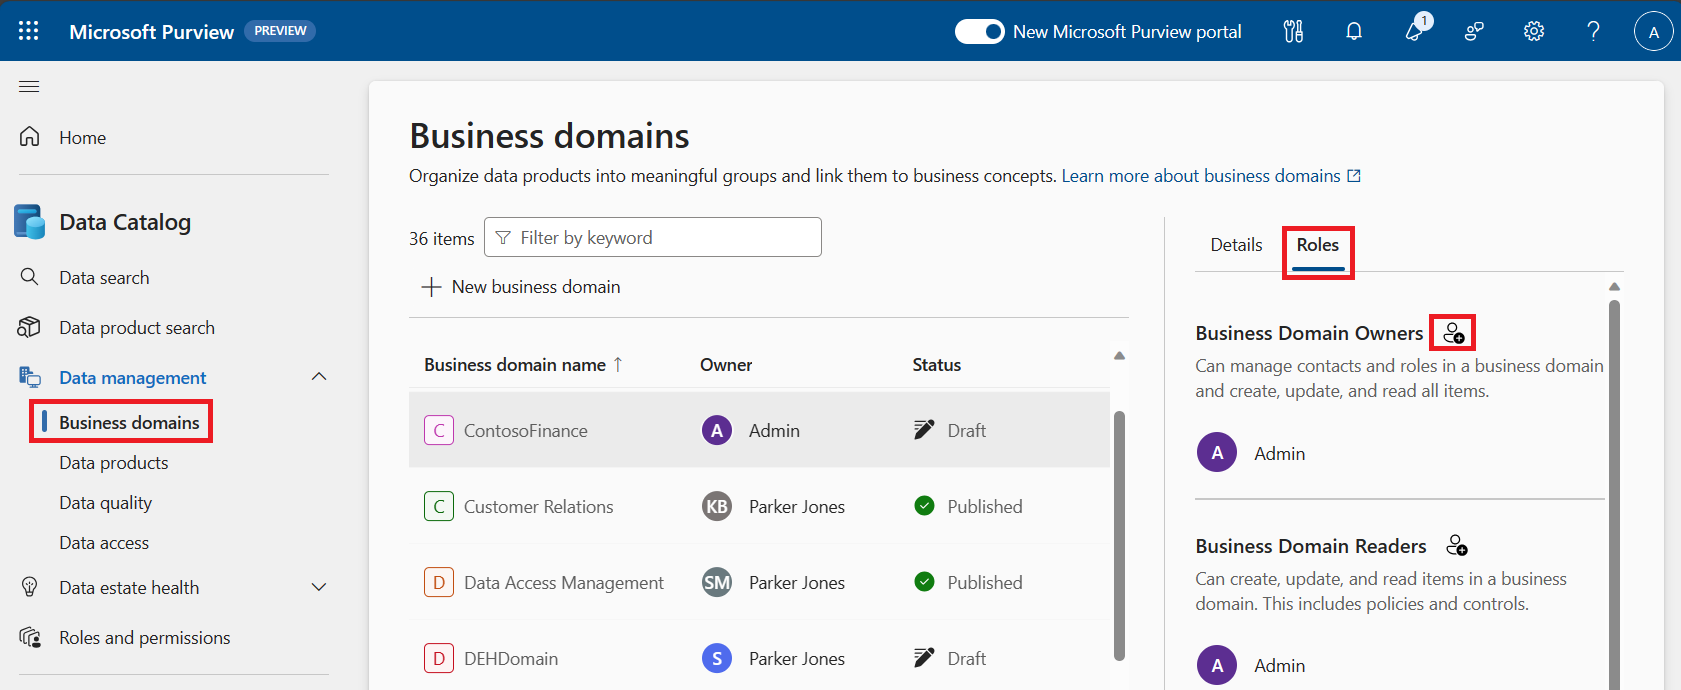 Screenshot of the business domains roles page with the edit button highlighted.